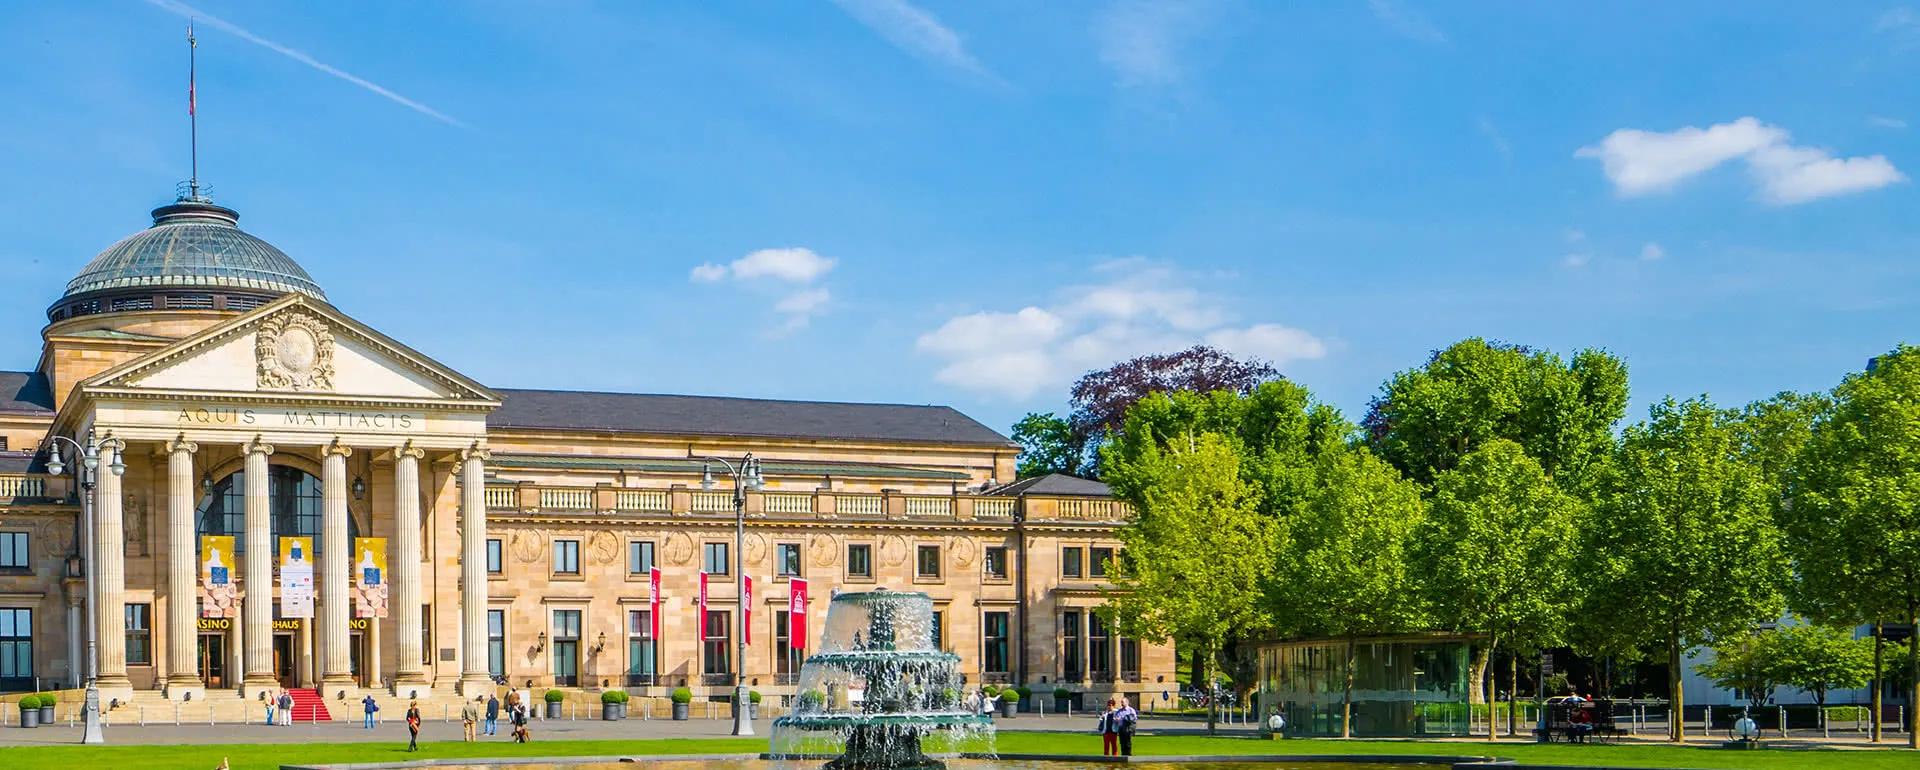 Wiesbaden - the destination with youth hostels